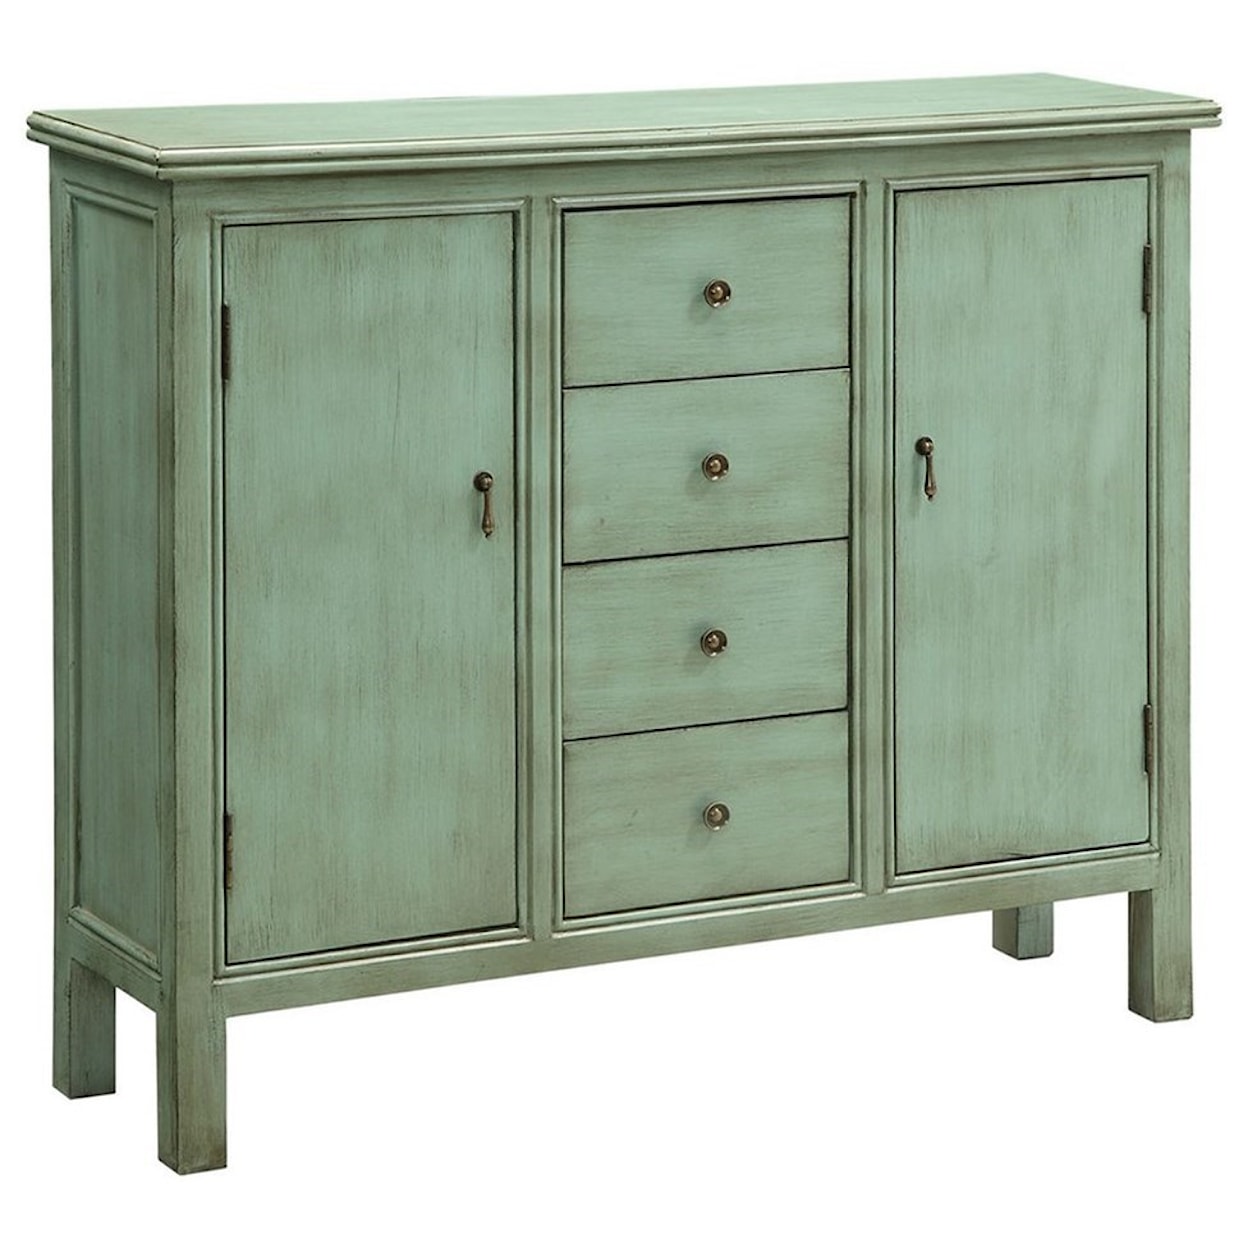 Crestview Collection Accent Furniture Belgrade Wall Cabinet